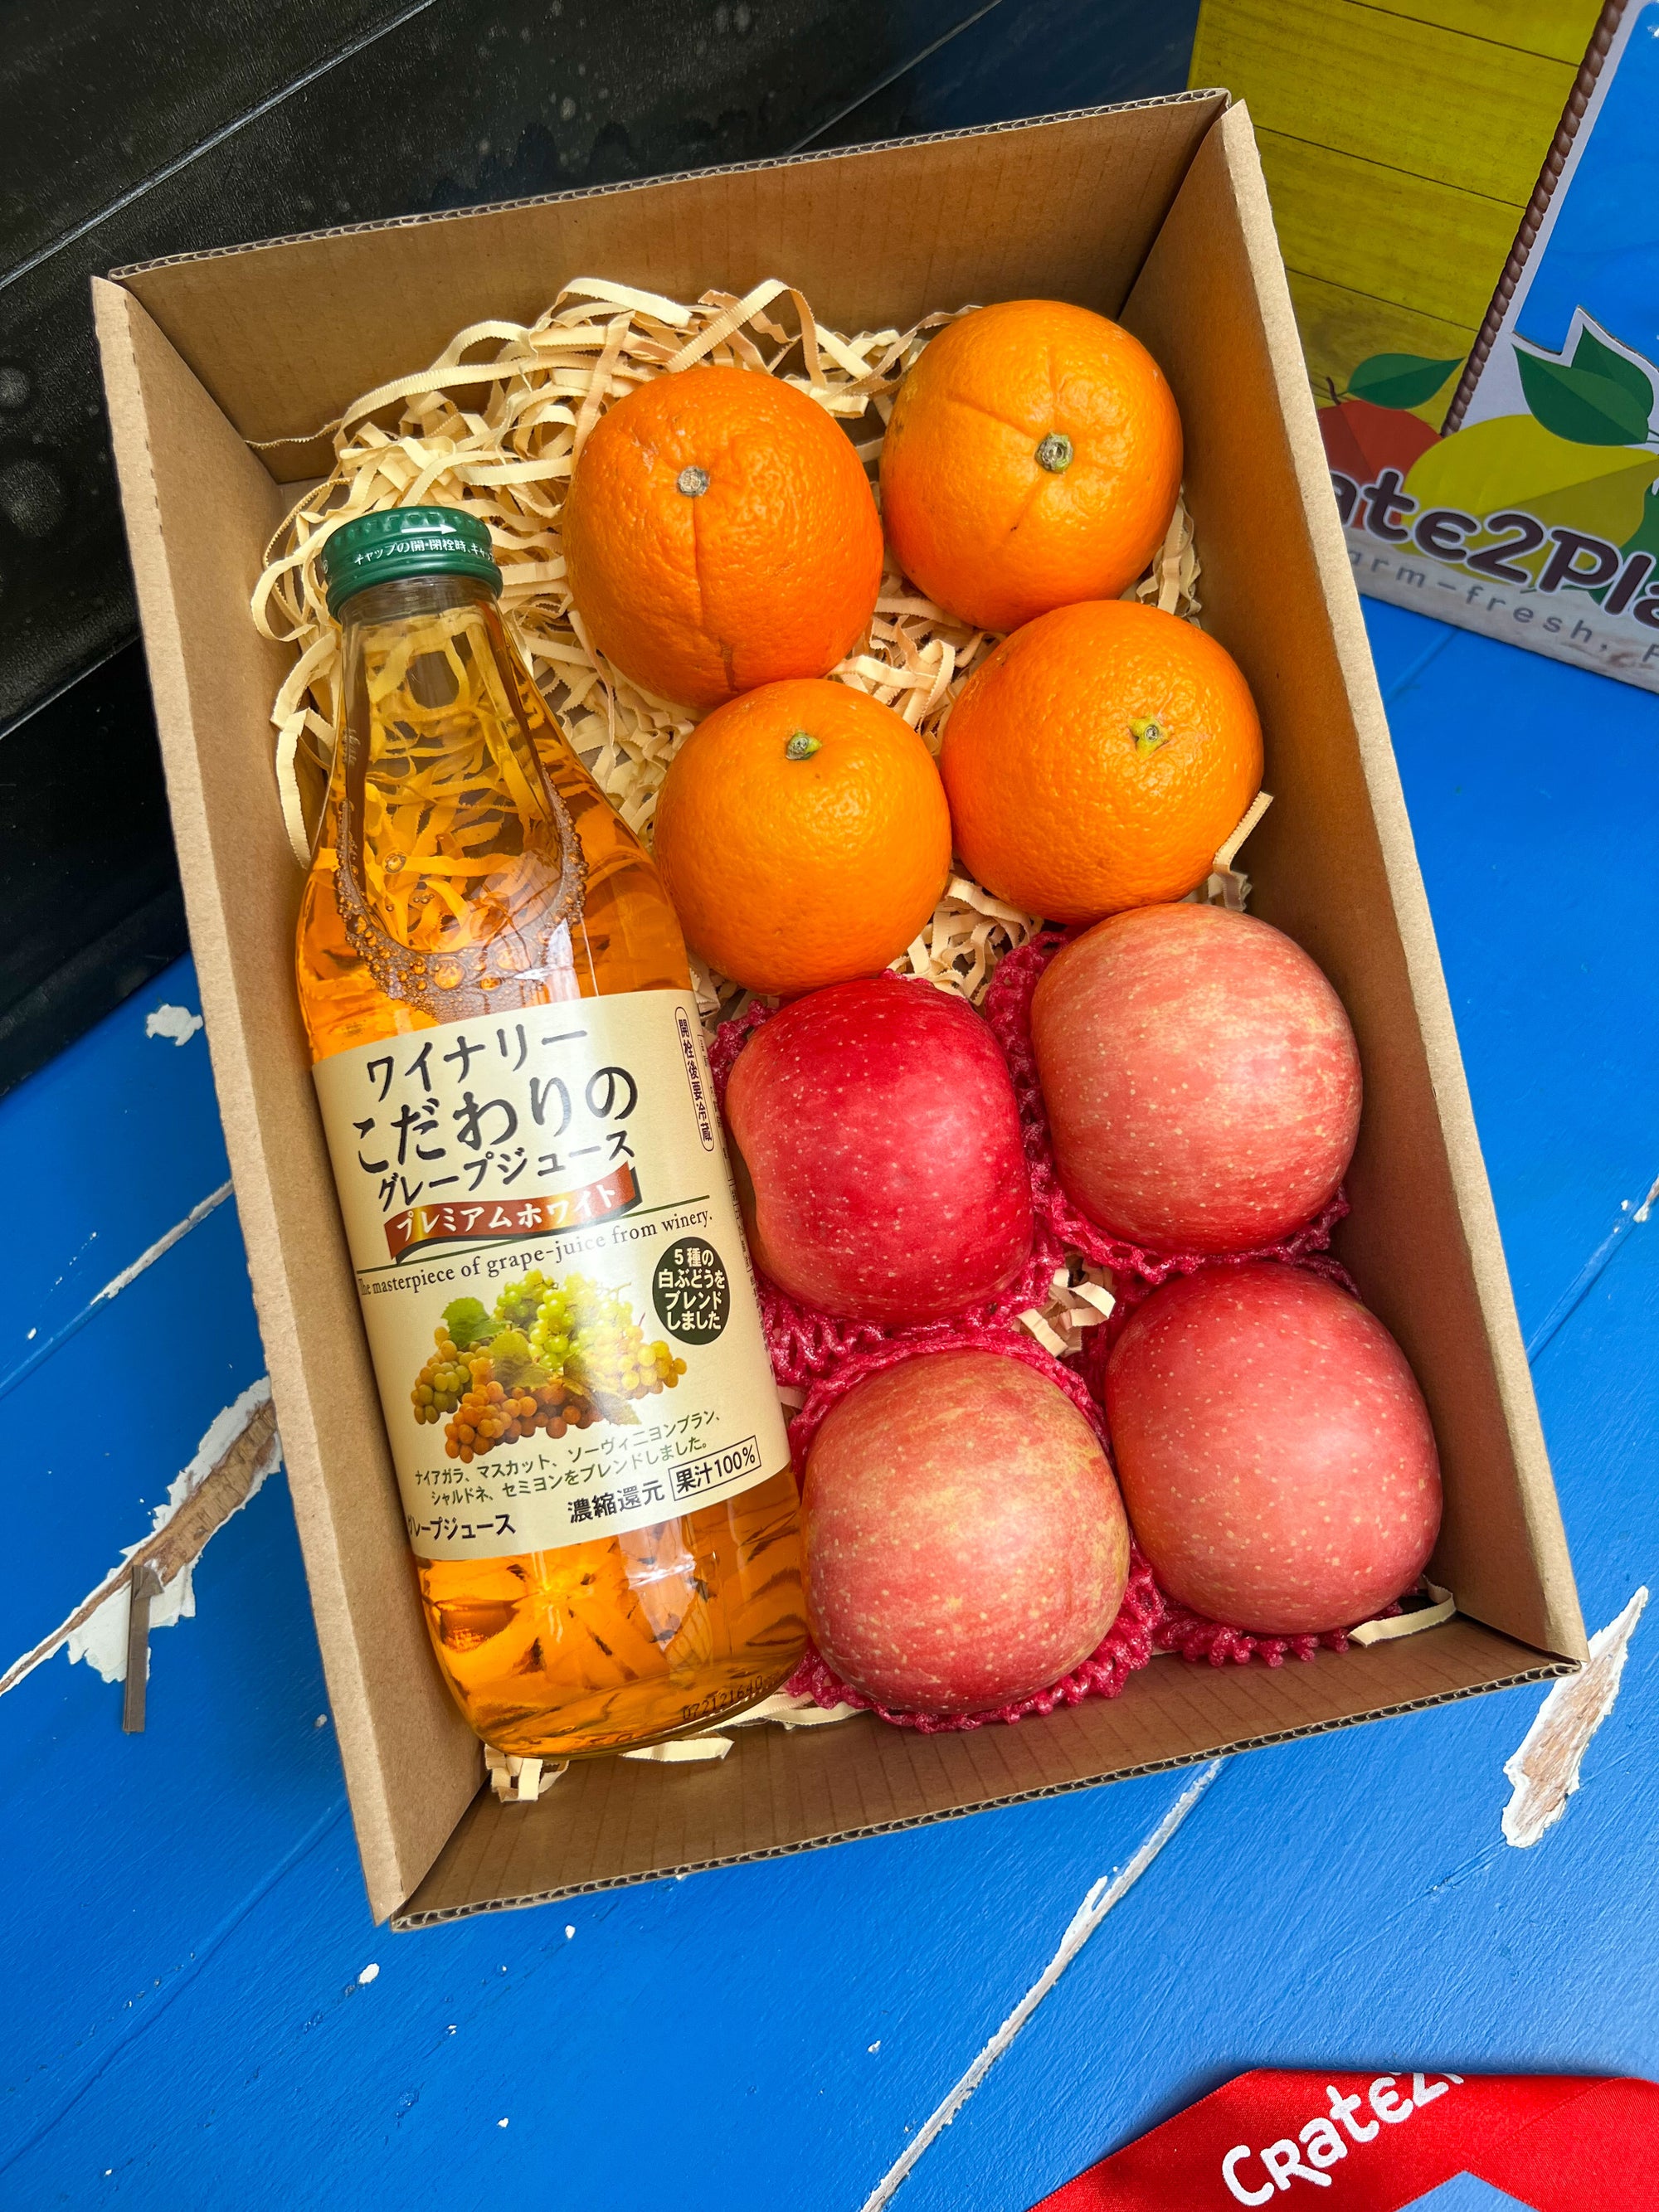 Gift Box Japan Alps White Grapes, Fuji Apples and Oranges